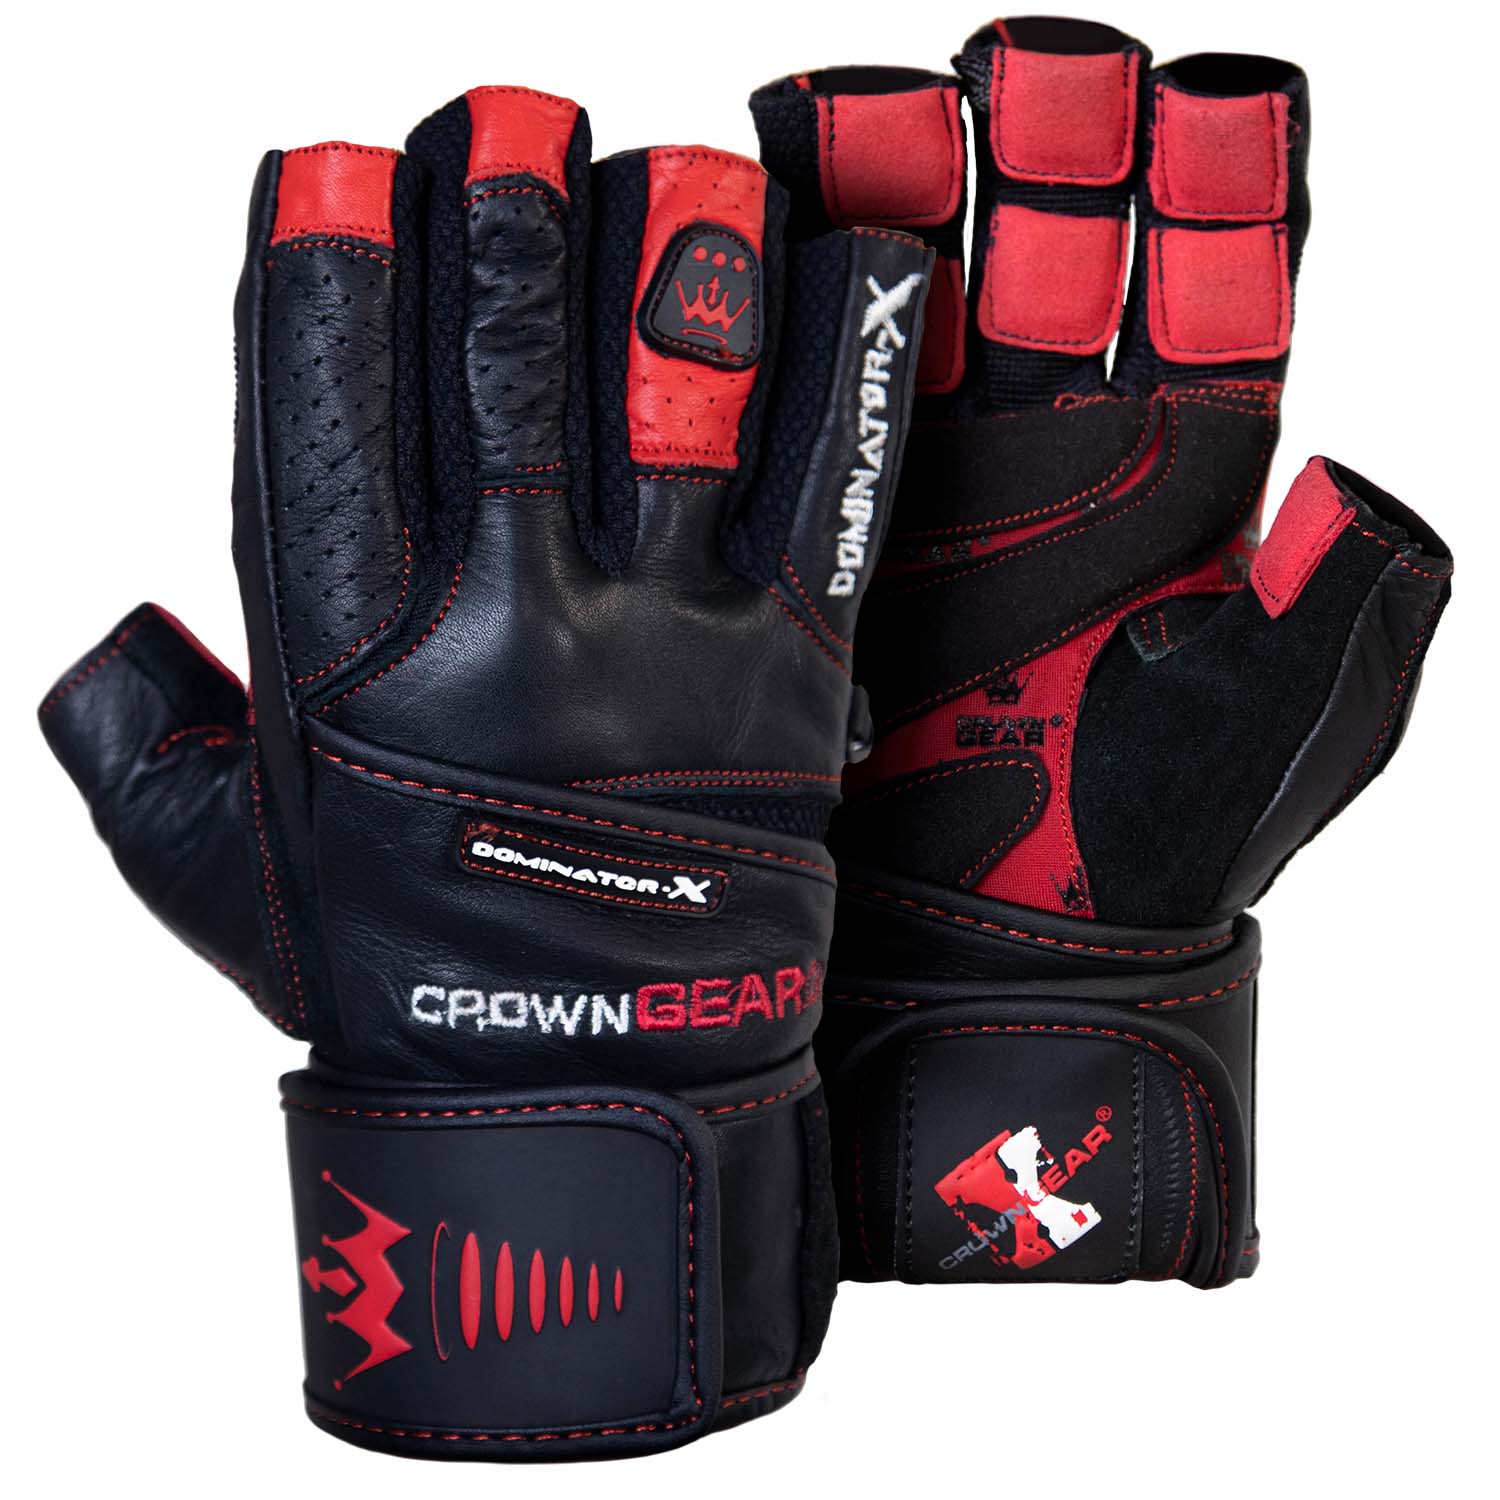 VINSGUIR Workout Gloves for Men and Women, Weight Lifting Gloves